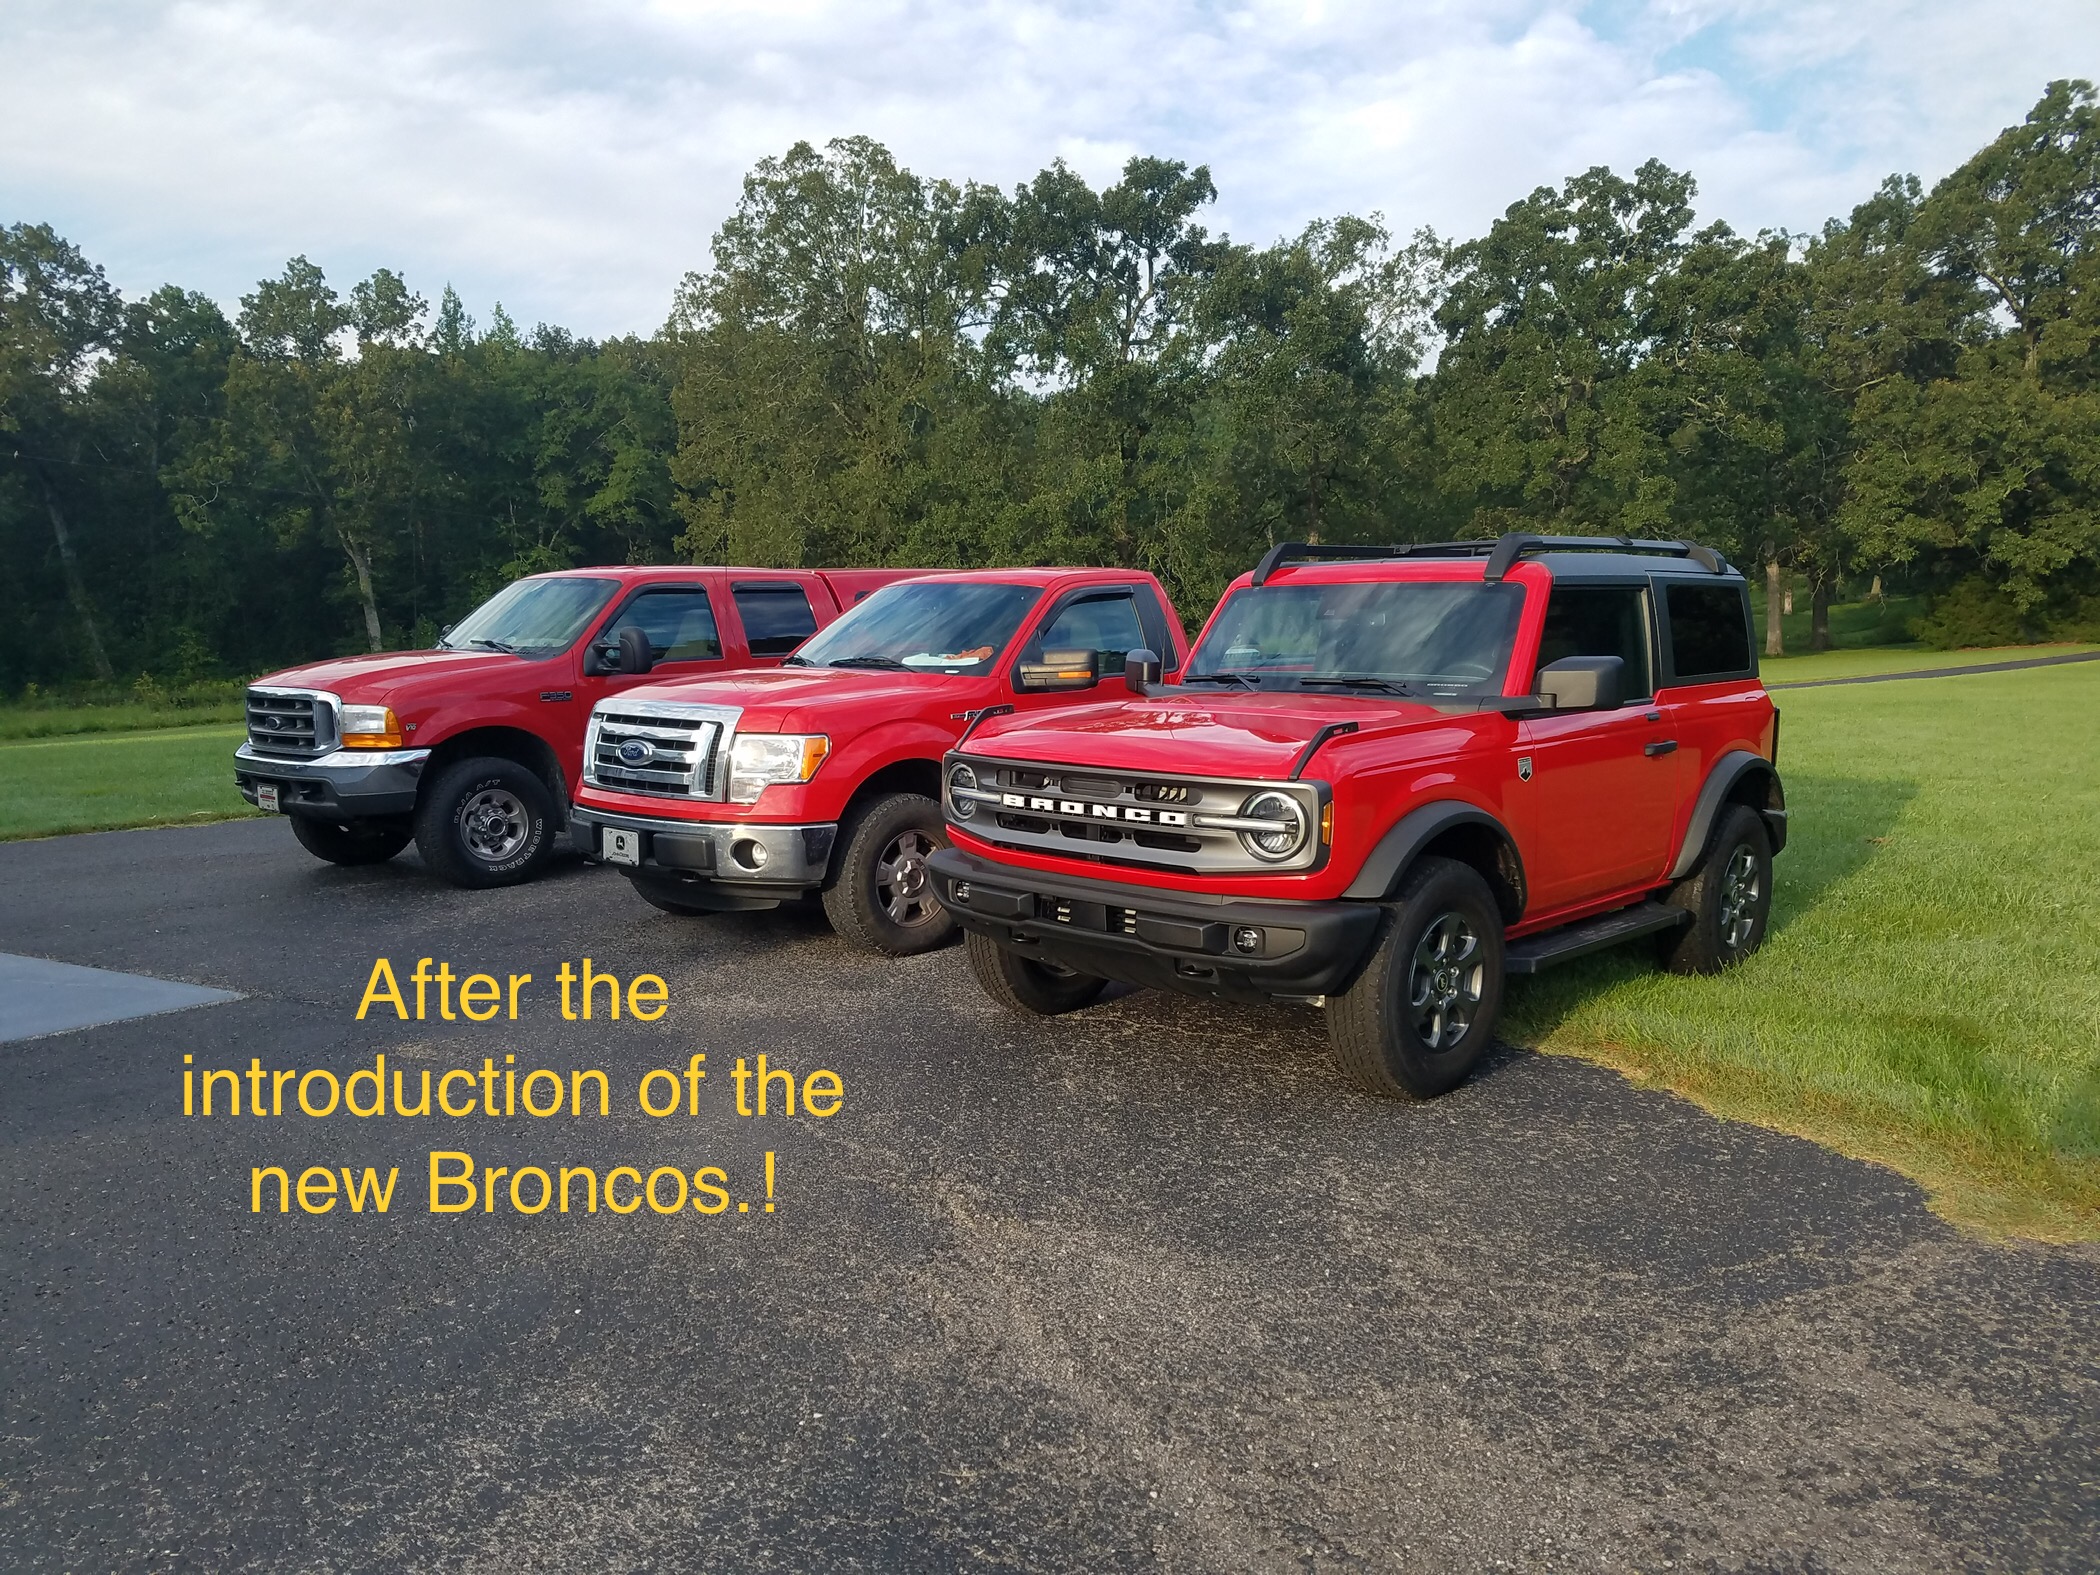 Ford Bronco Tell me you love Ford without telling me you love Ford! 2BA76DA4-E0CC-4E3A-AE1A-0BB7F325D963